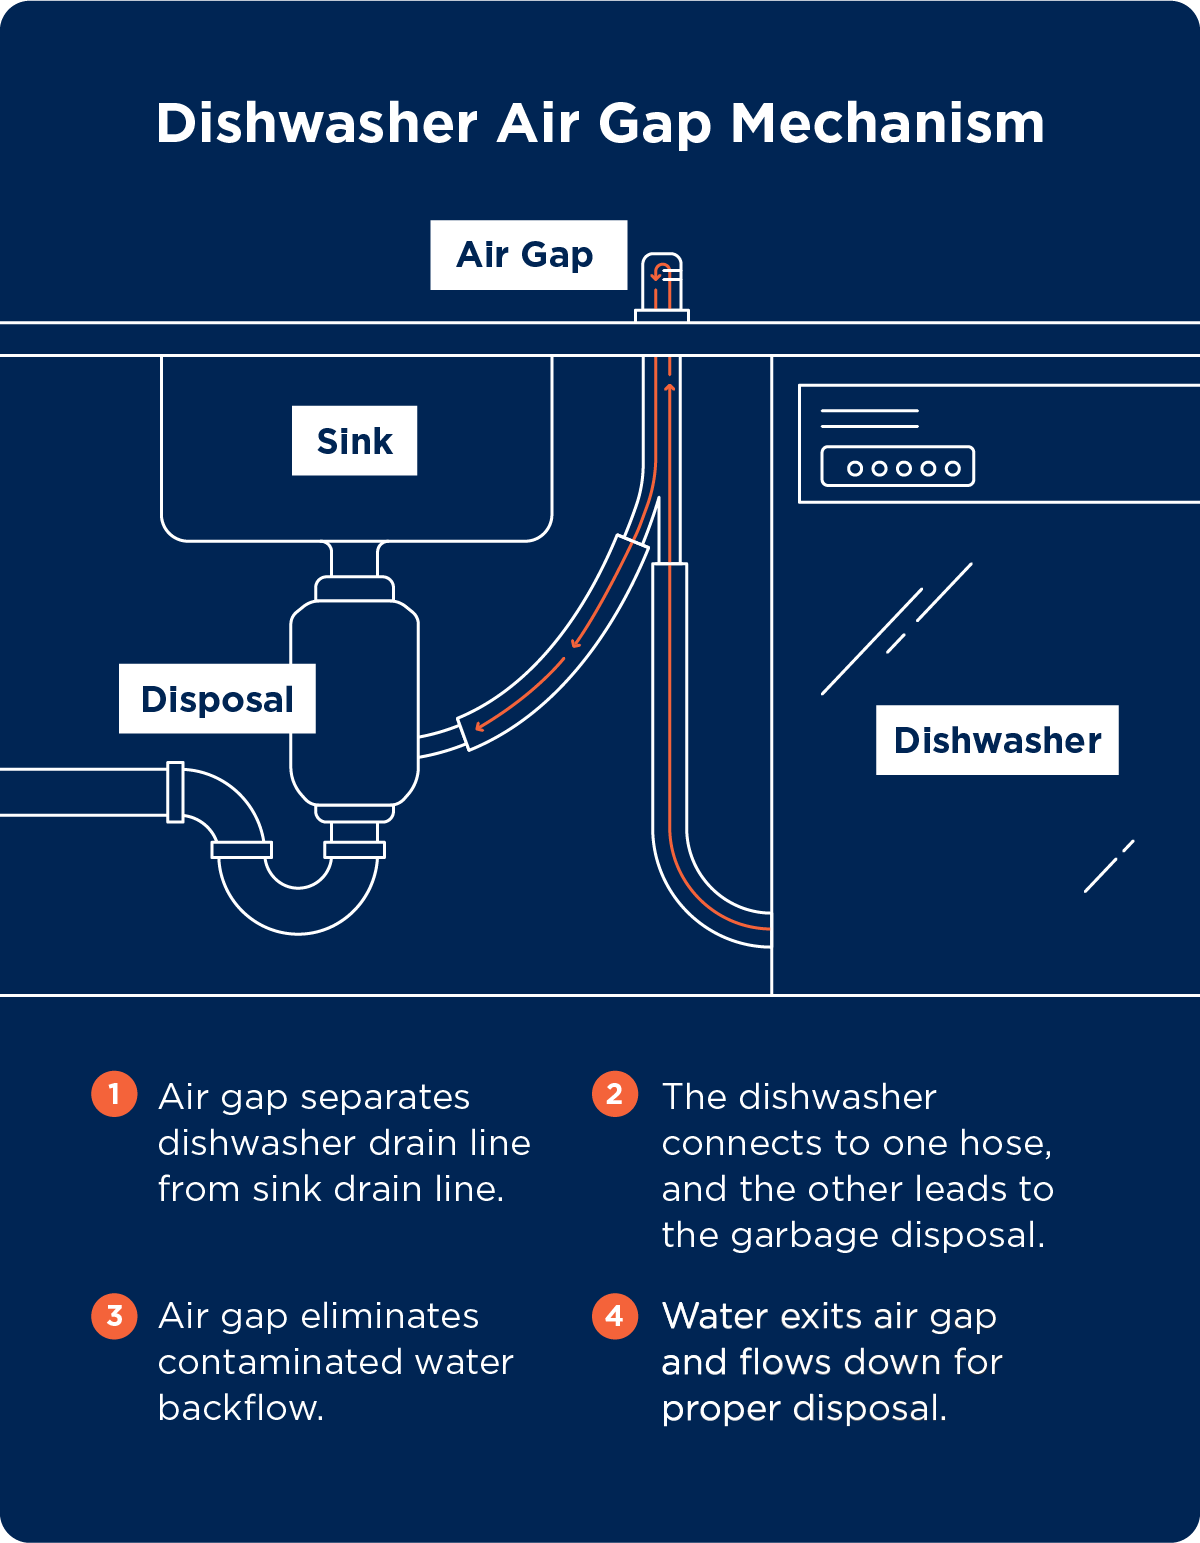 Graphic showing how a dishwasher air gap functions.